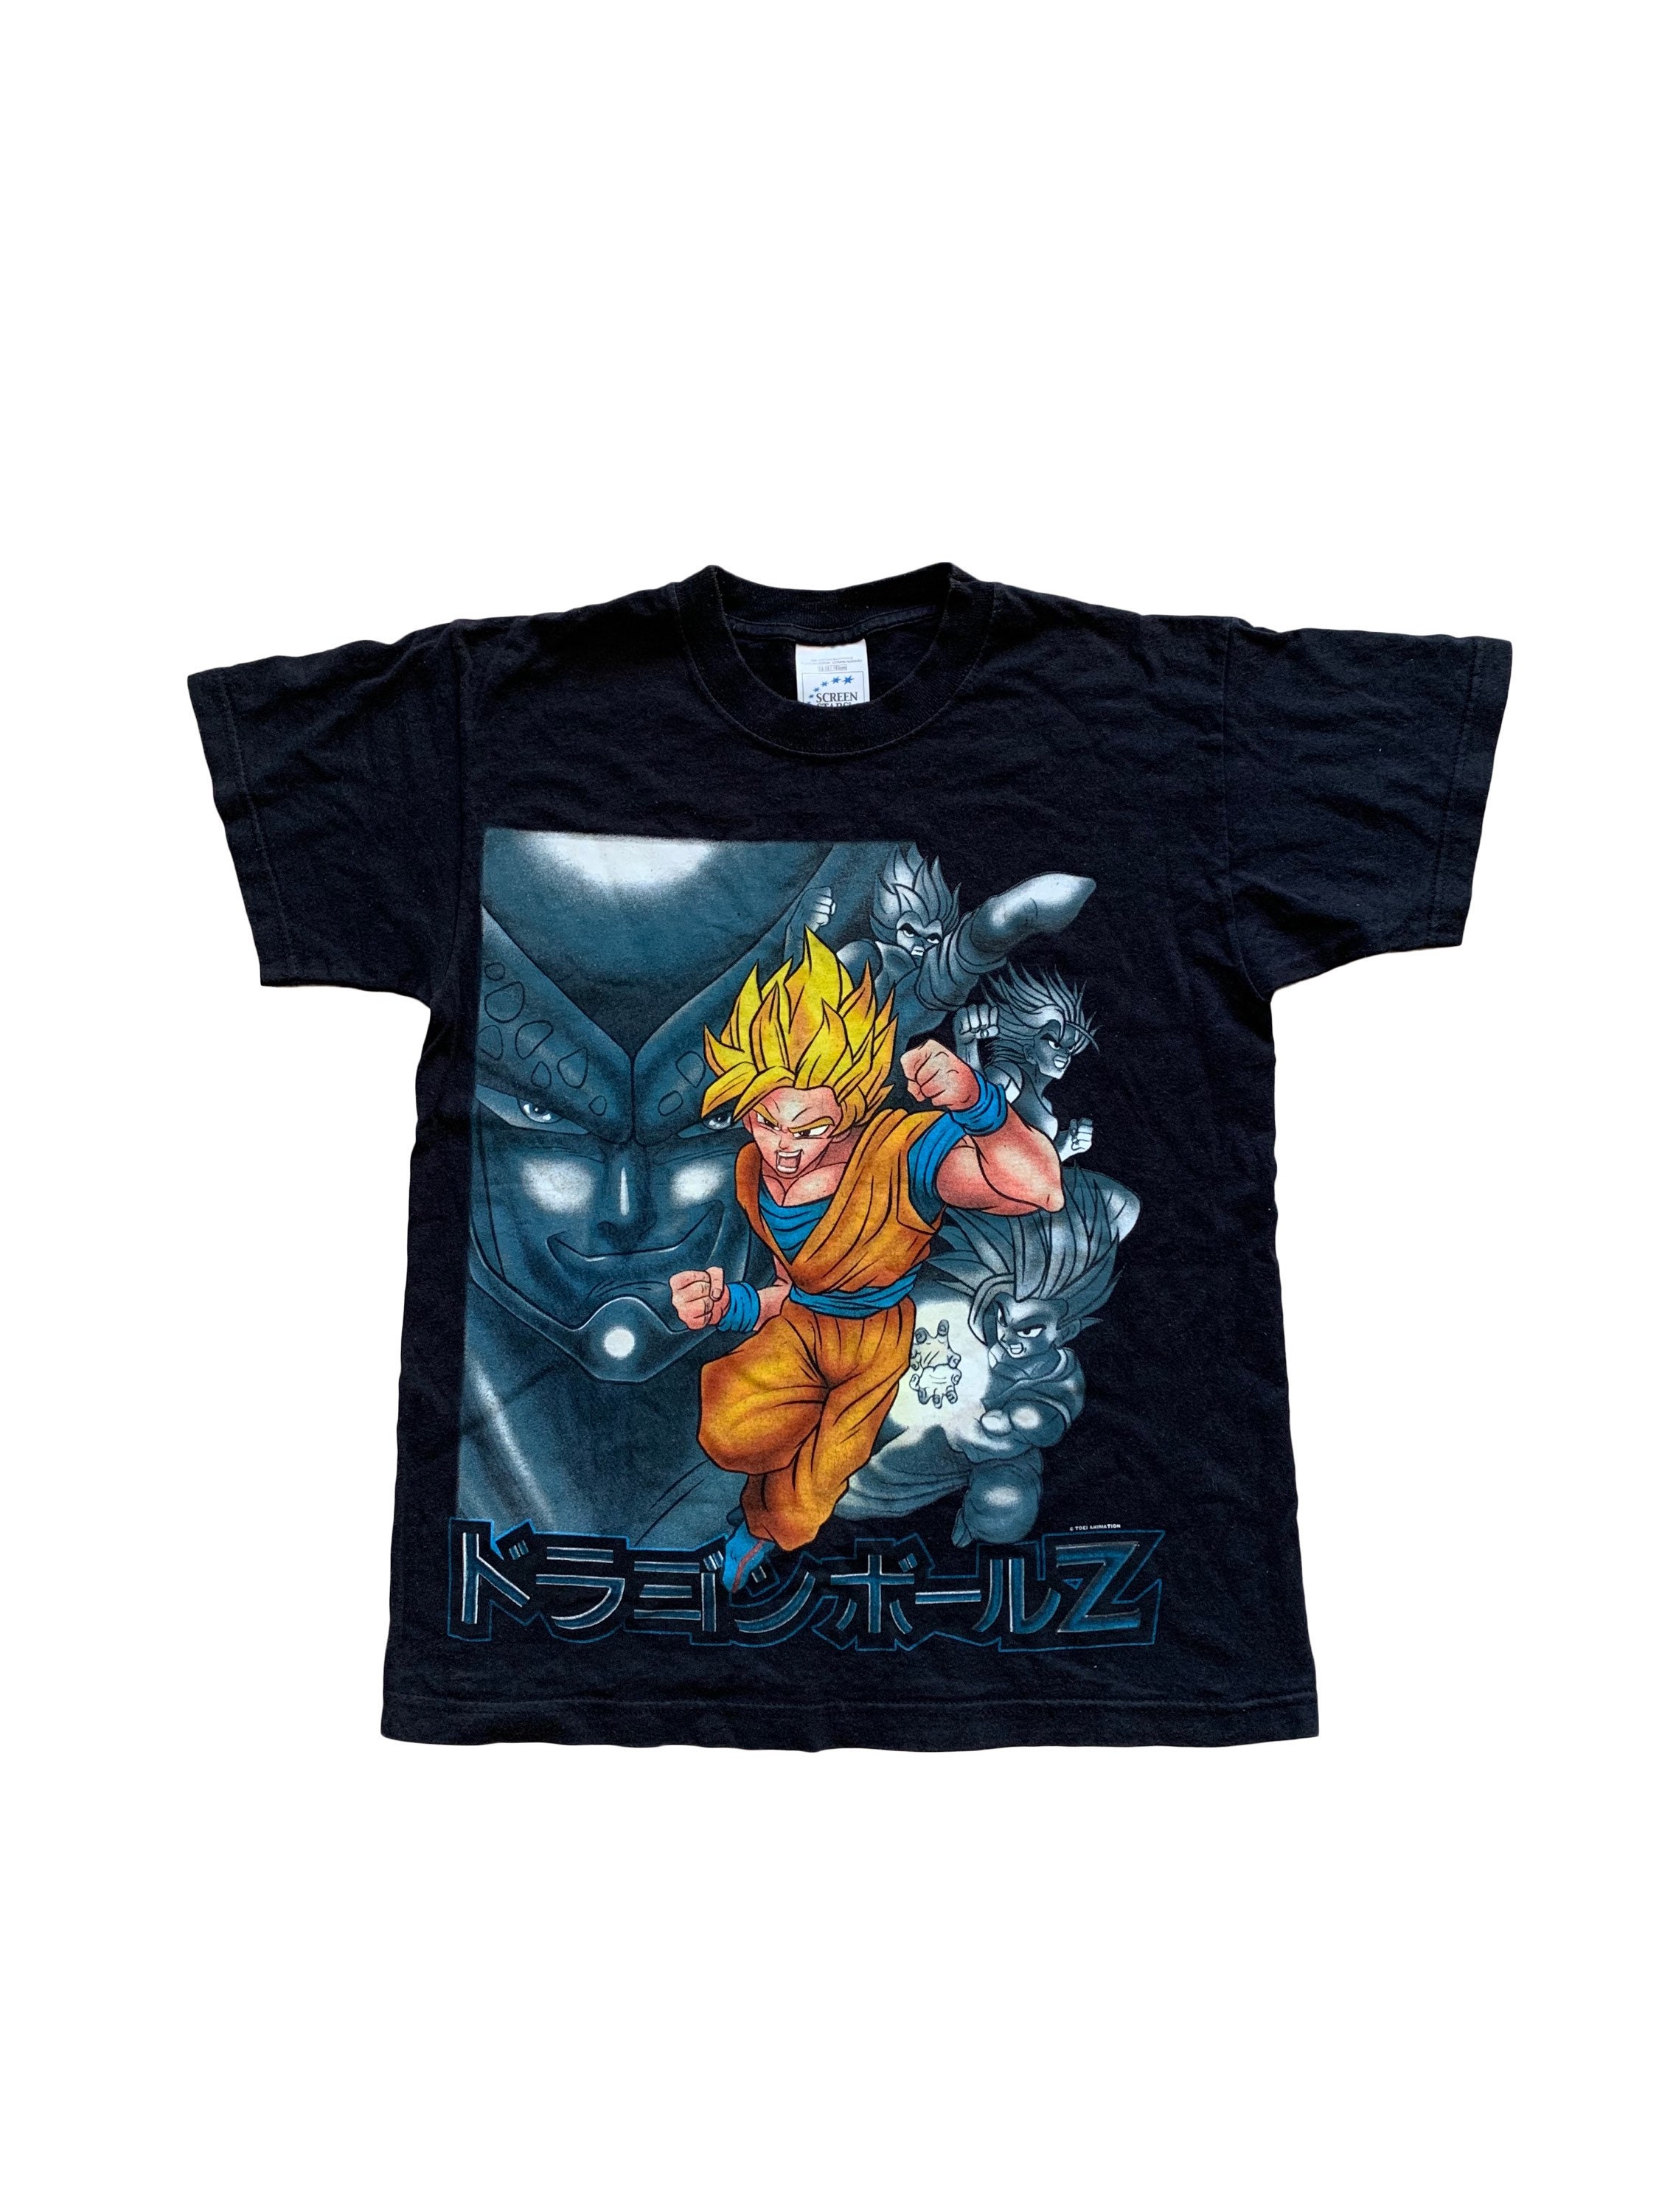 Buy Dragon Ball Shirt Online In India -  India